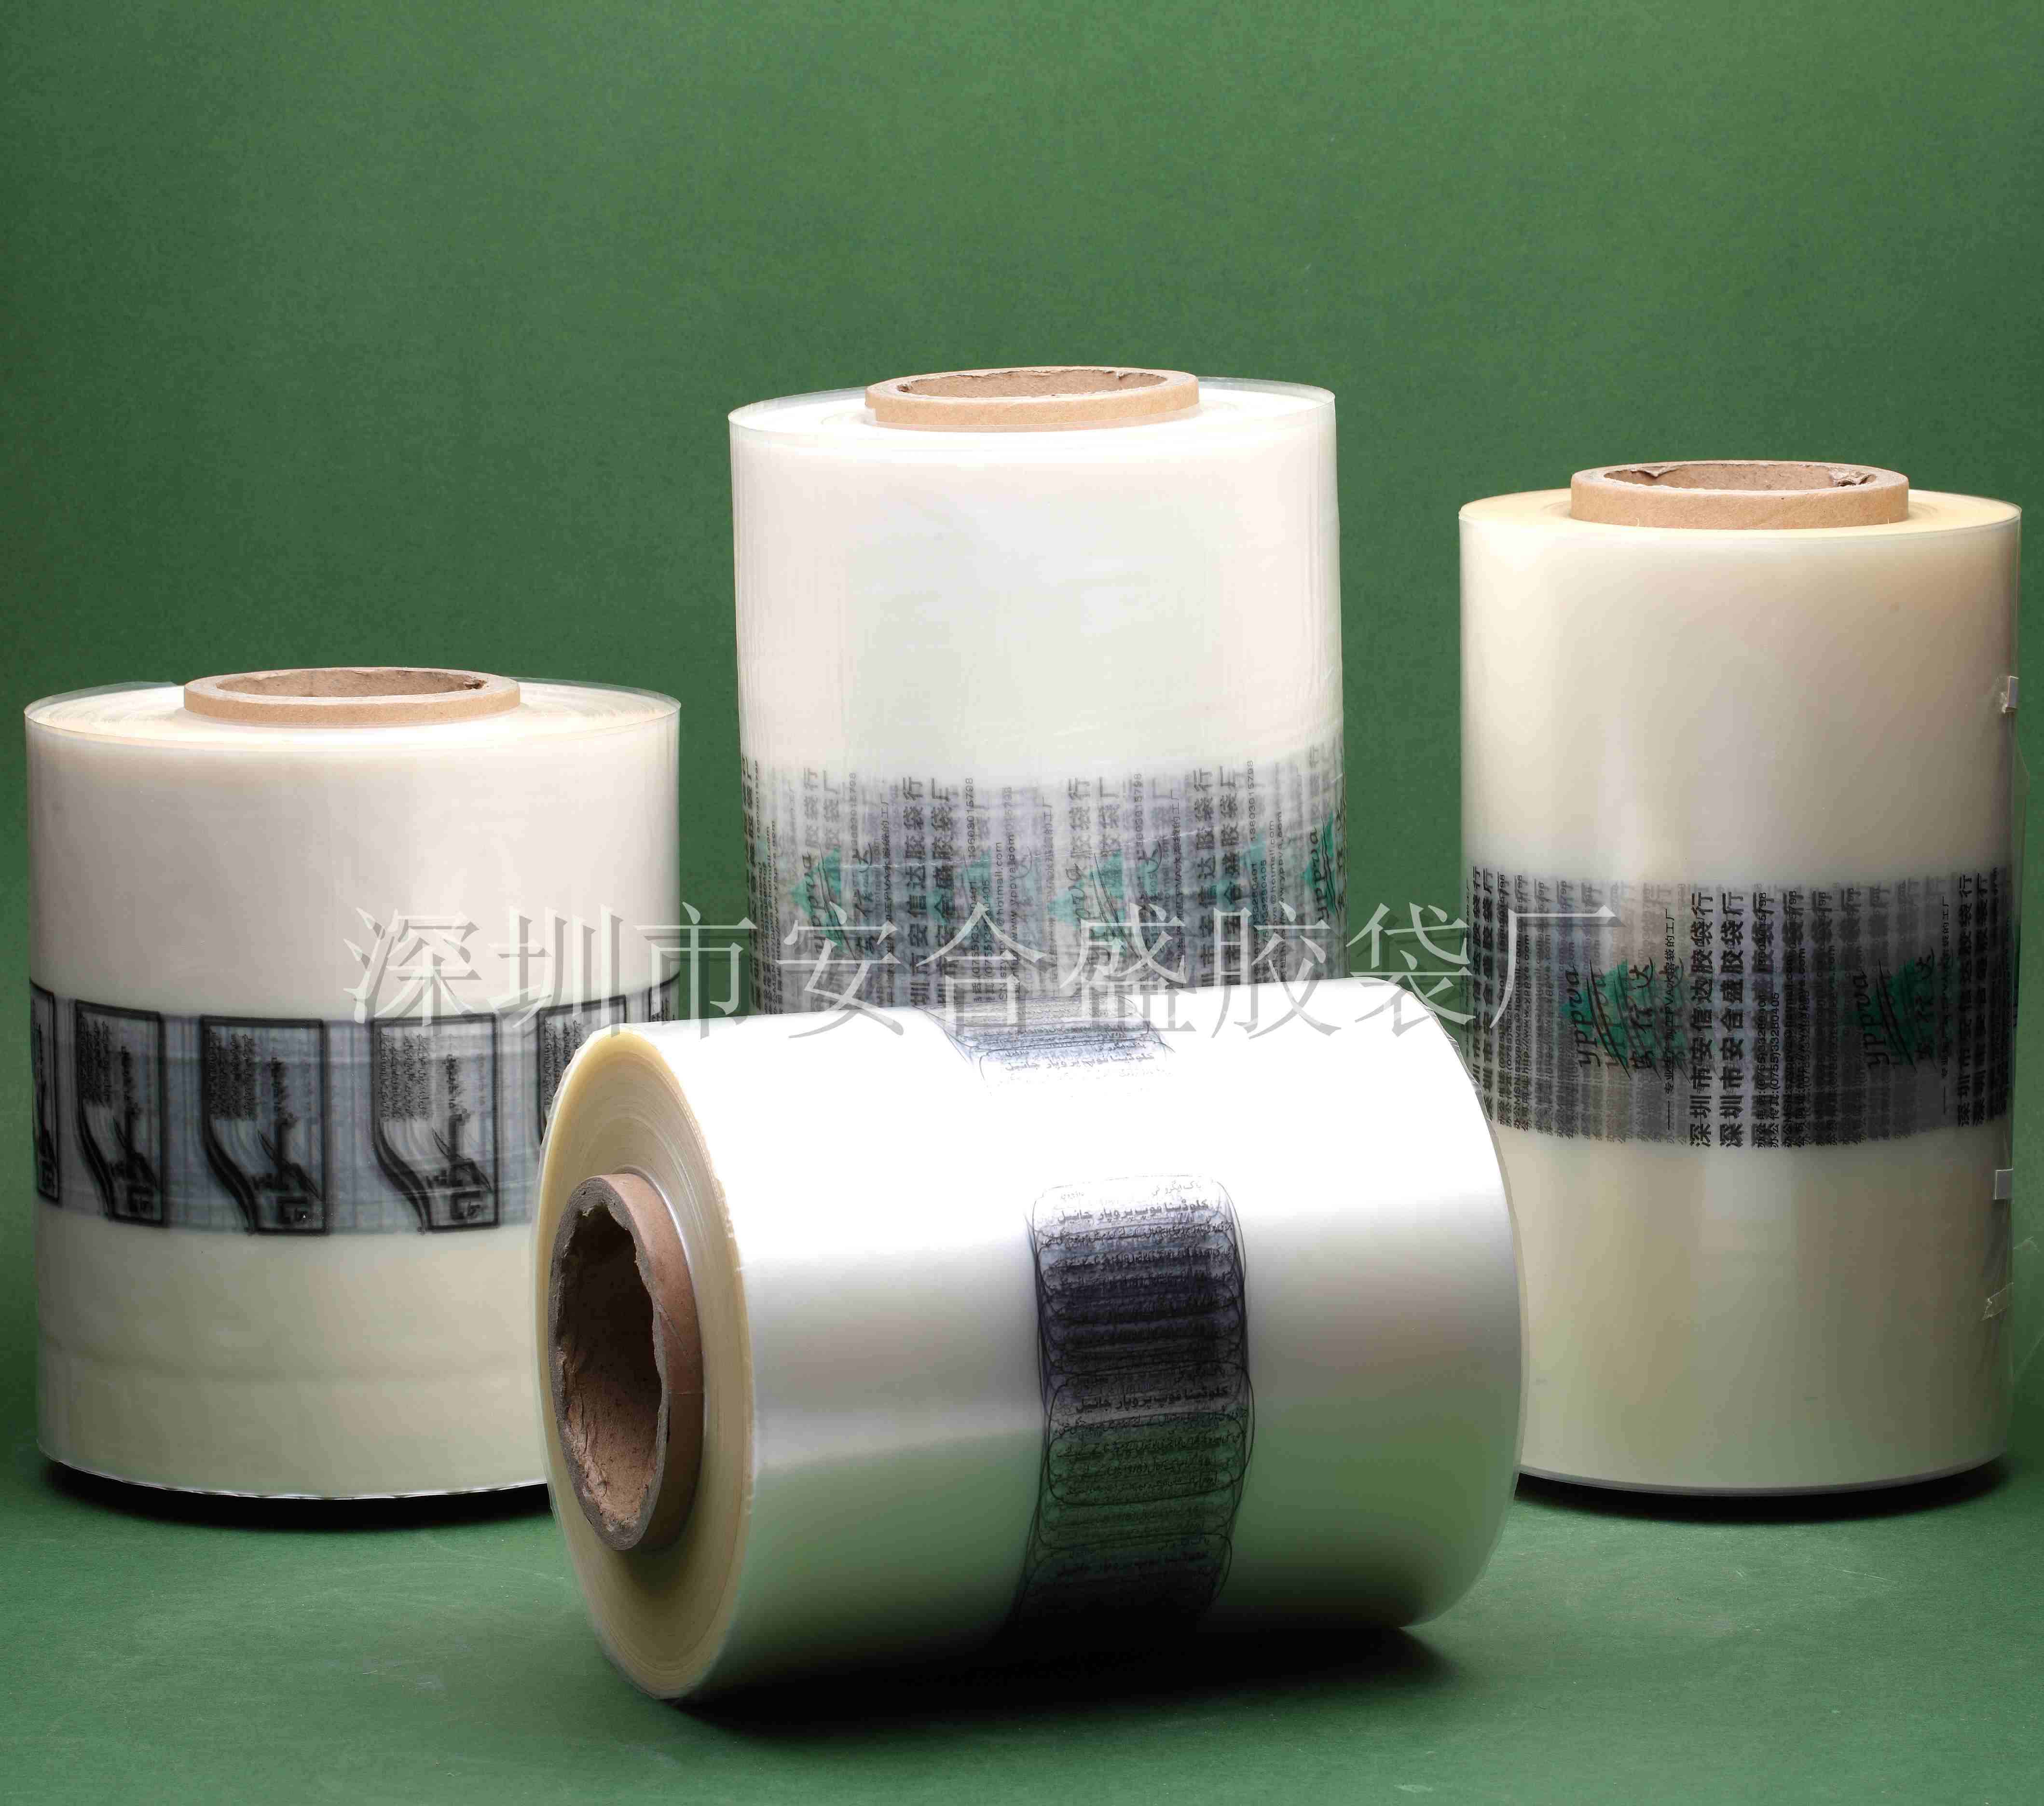 Water soluble film